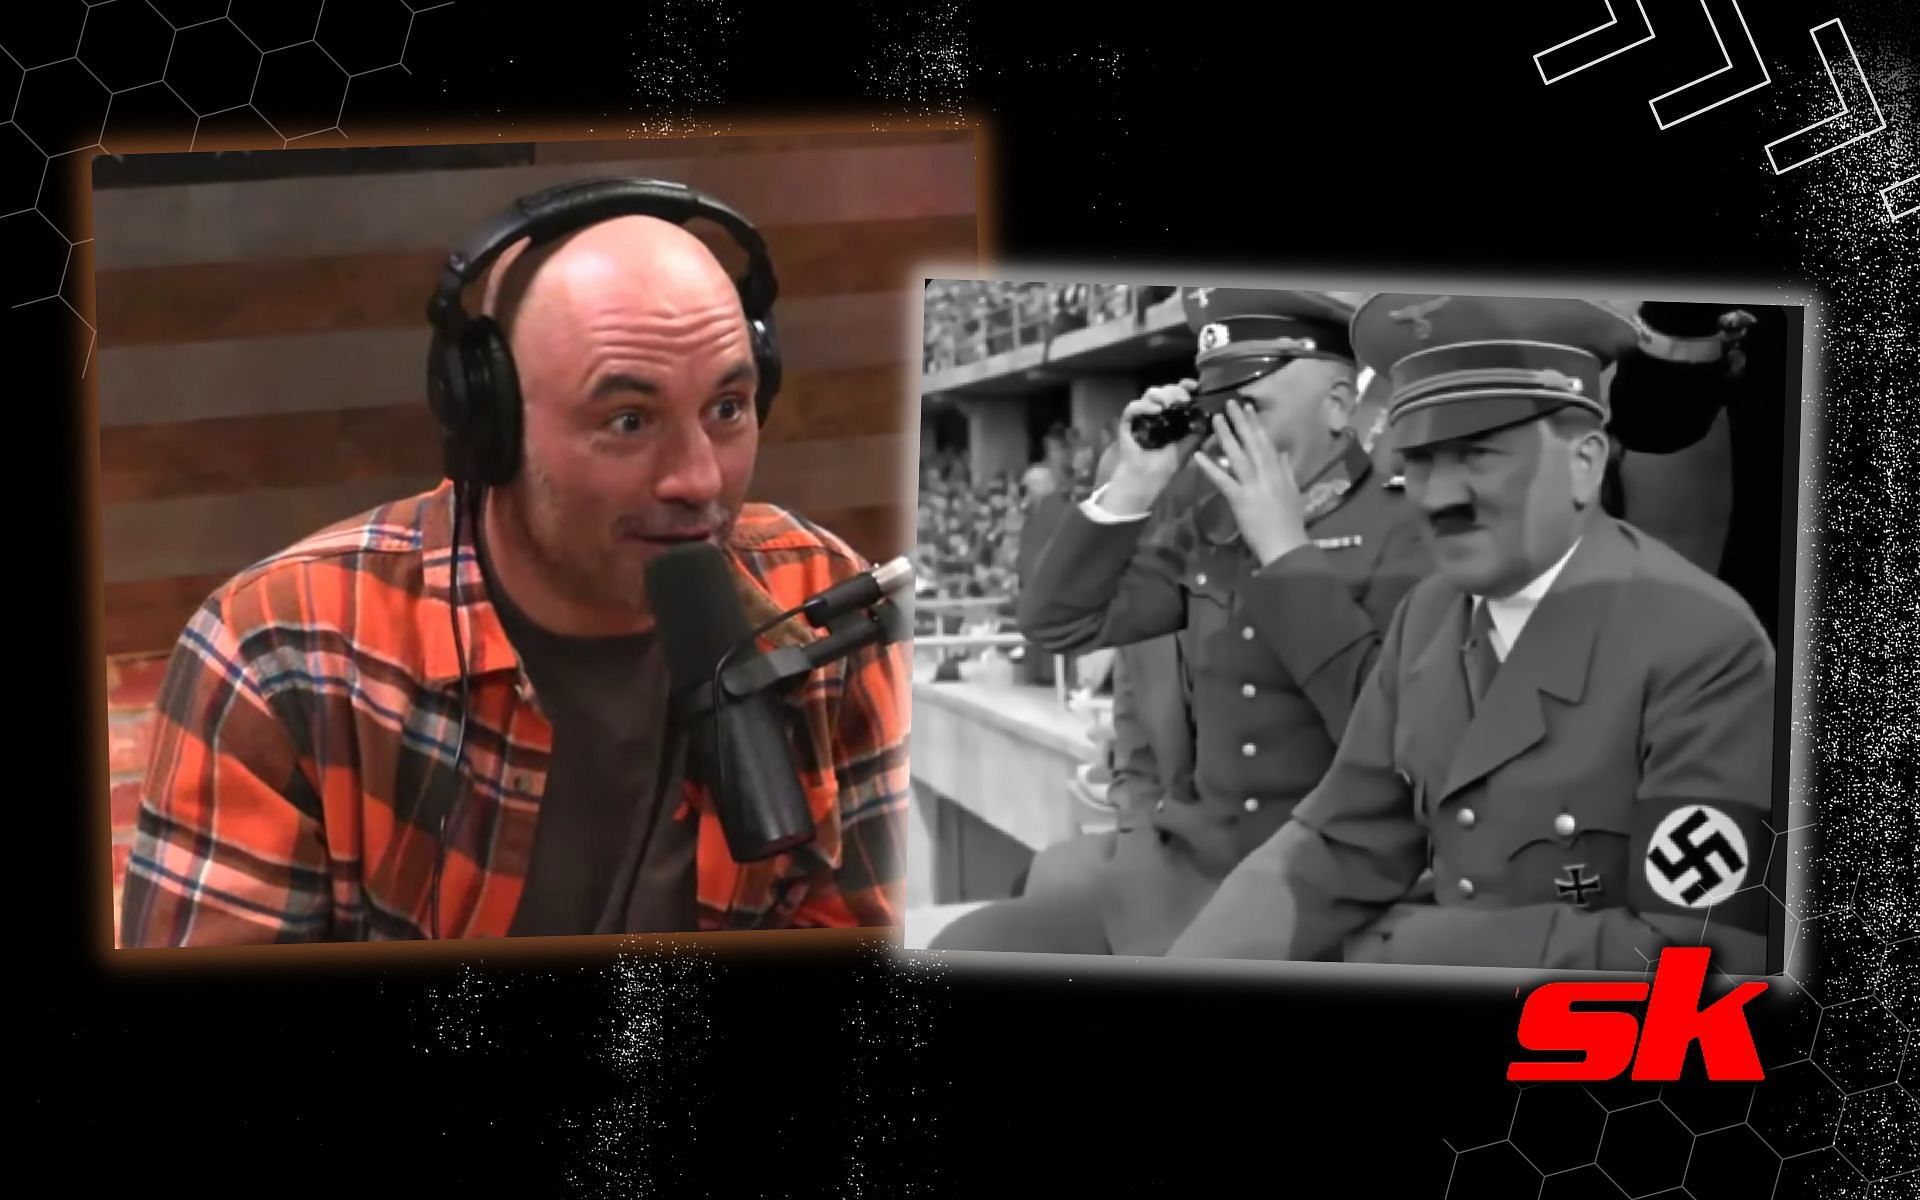 When Joe Rogan showed hilarious video evidence to claim Adolf Hitler was high on drugs during 1936 Olympic games. [Image credits: @TheSigmaLife and @PowerfulJRE on YouTube]